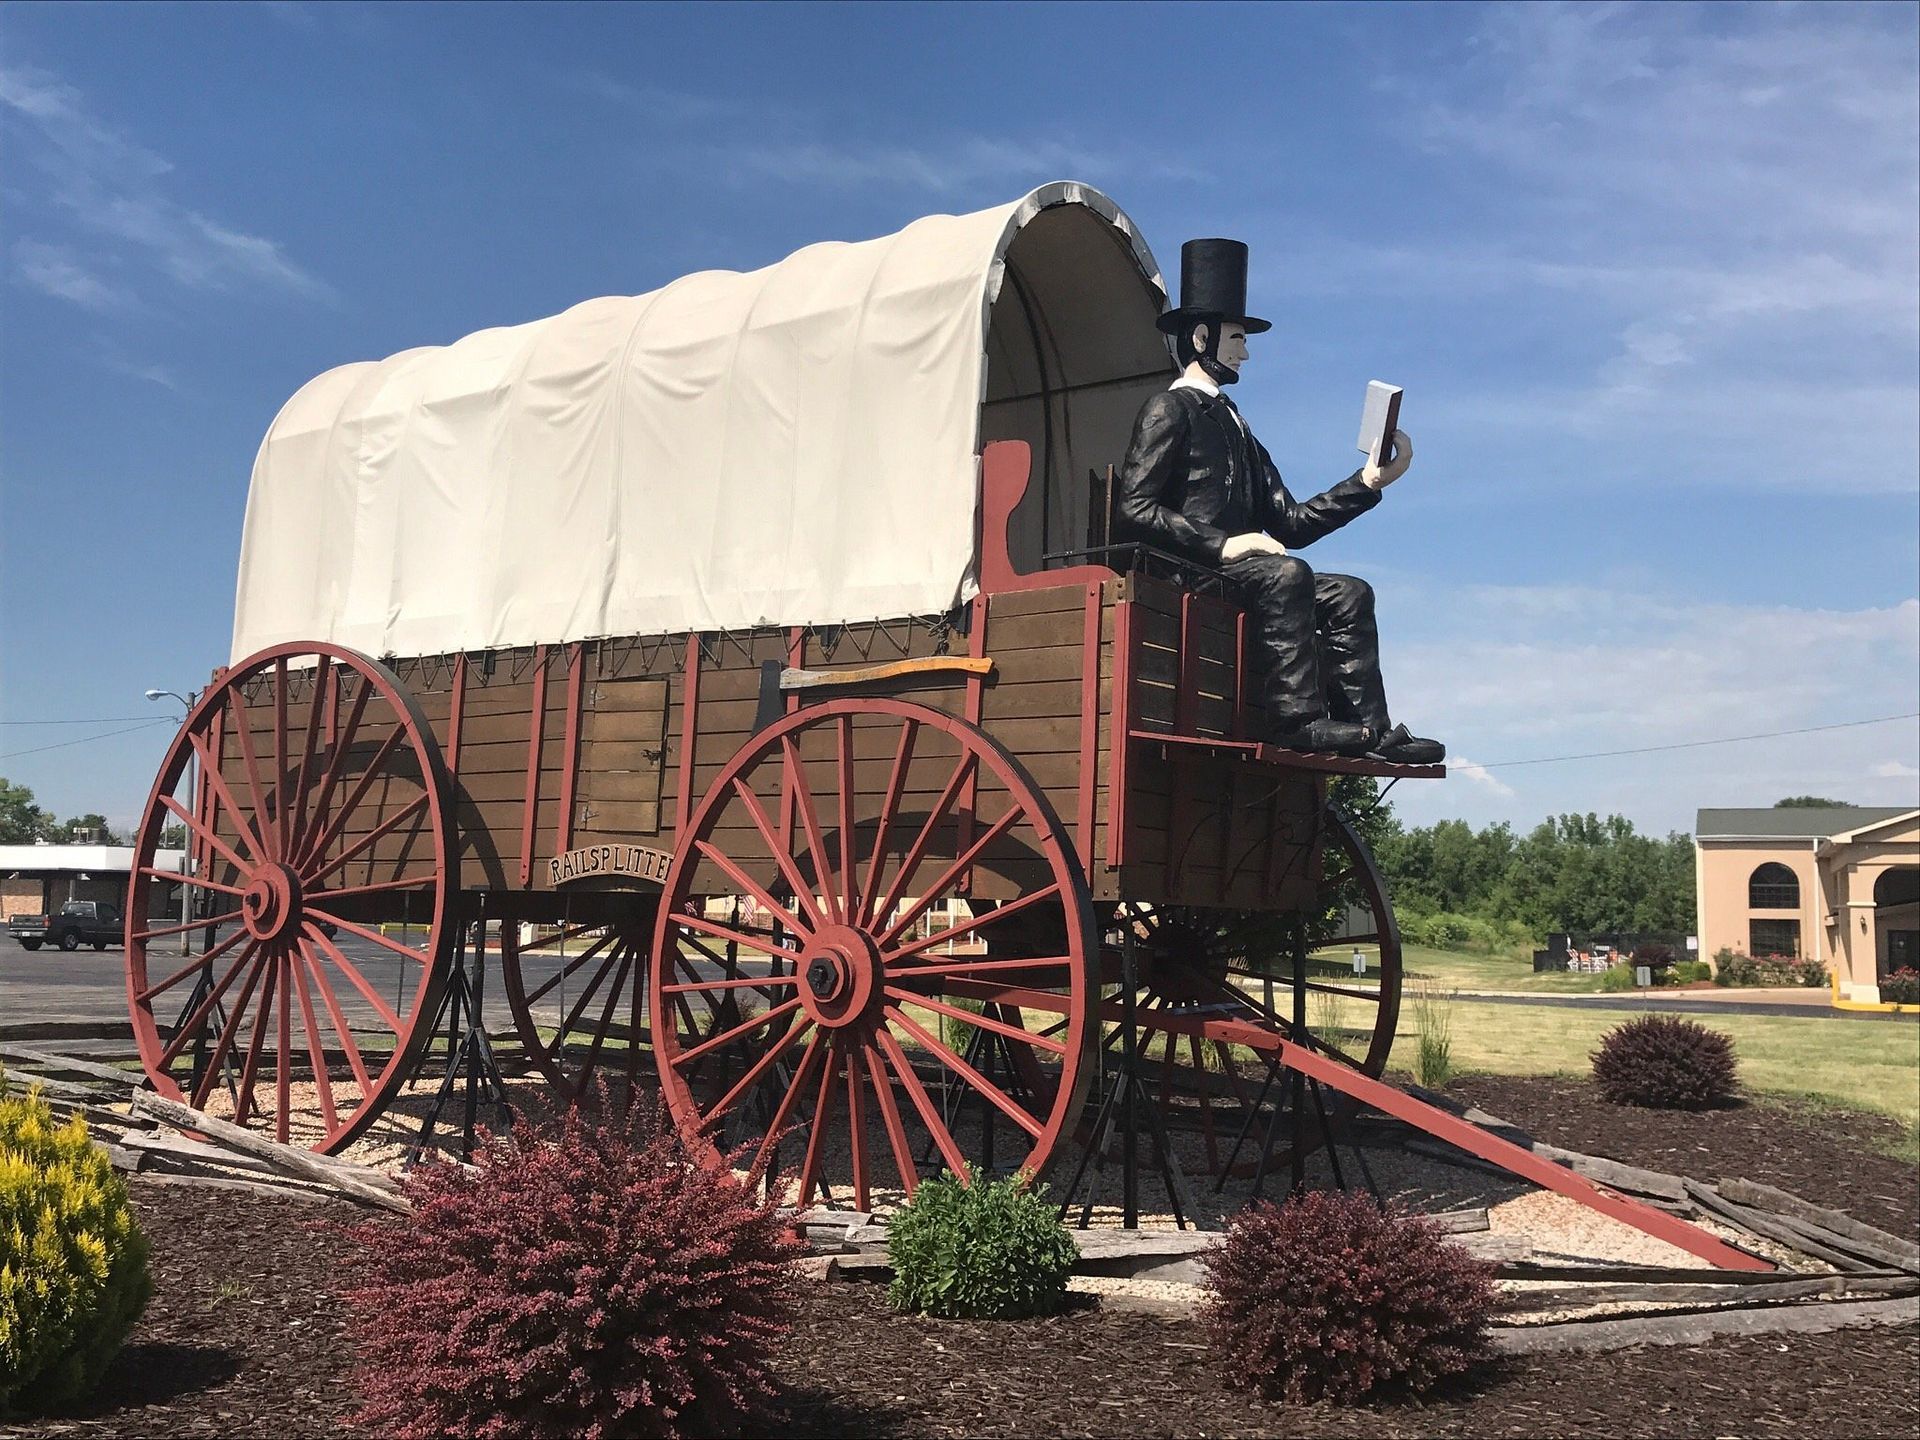 World's Largest Covered Wagon, world record in Lincoln, Illinois
